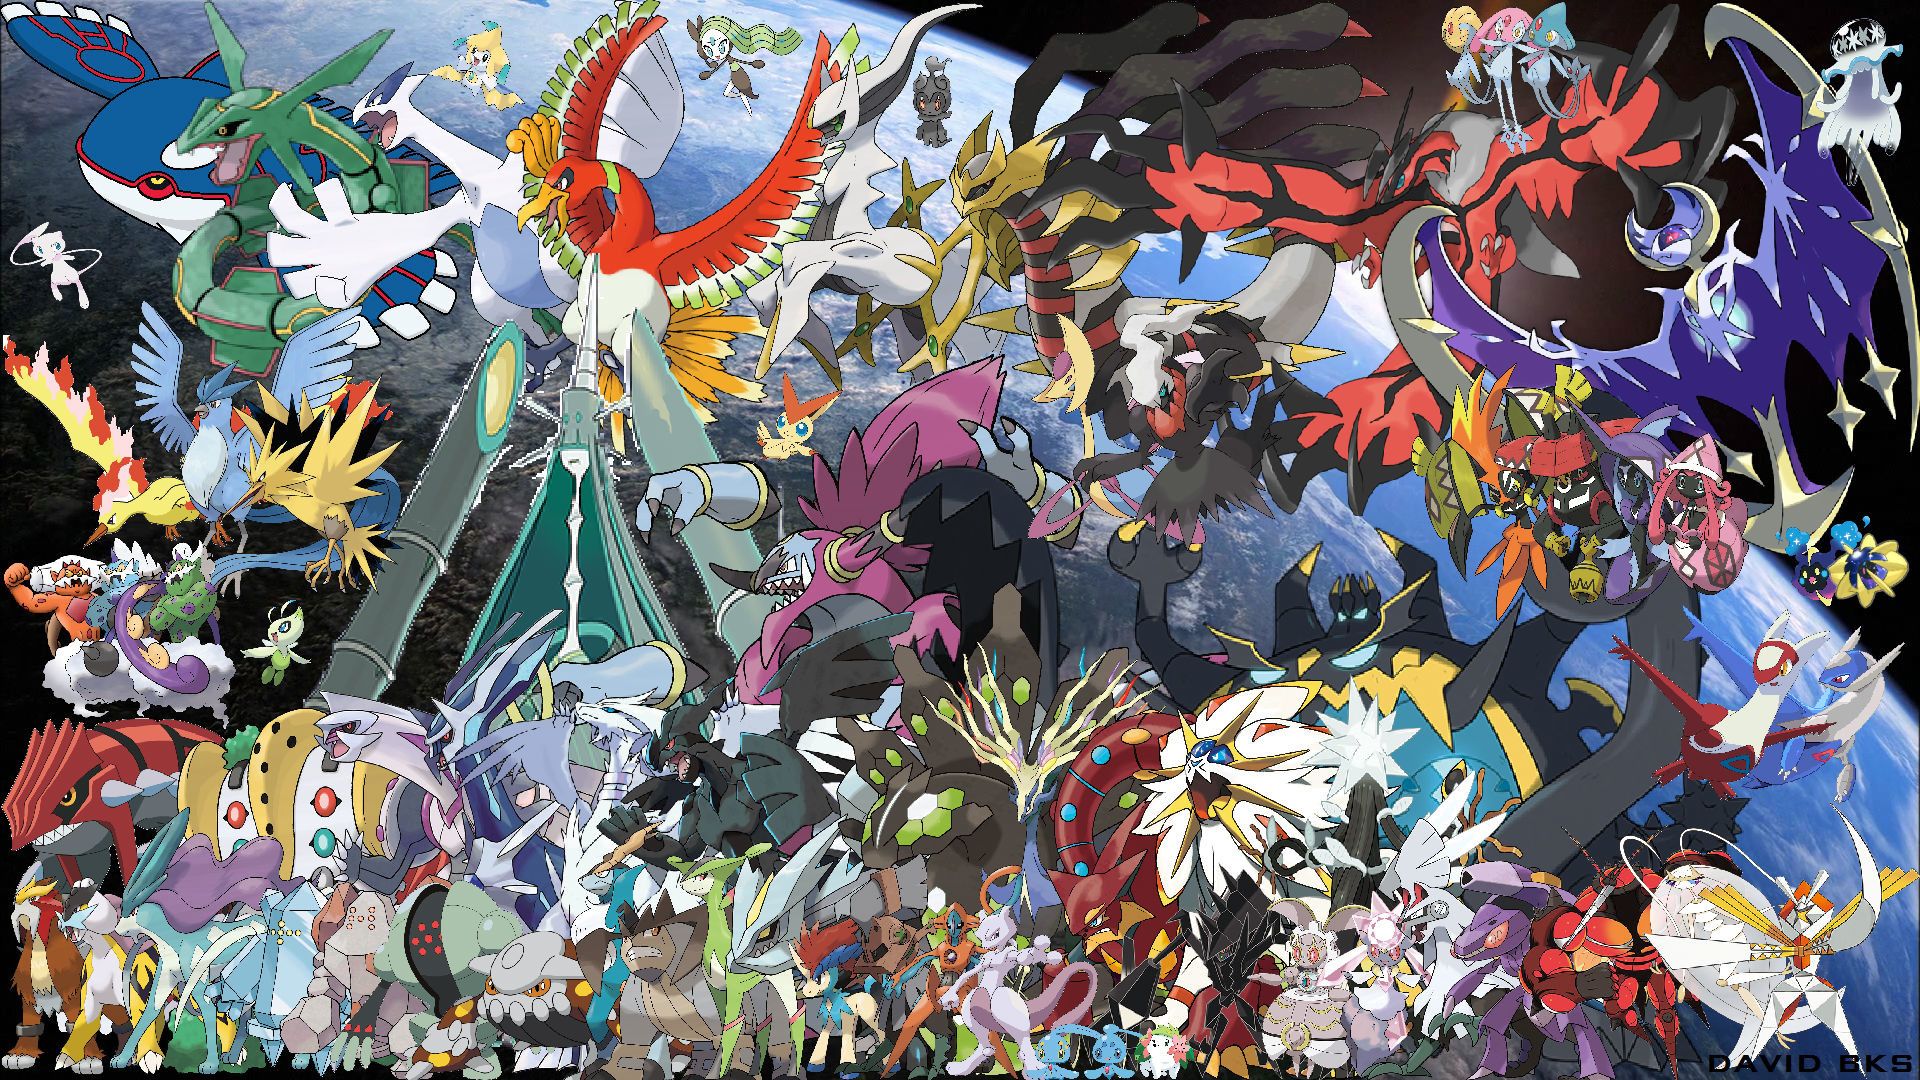 Cool Legendary Pokemon Wallpapers Hd Pokemon Download pictures.